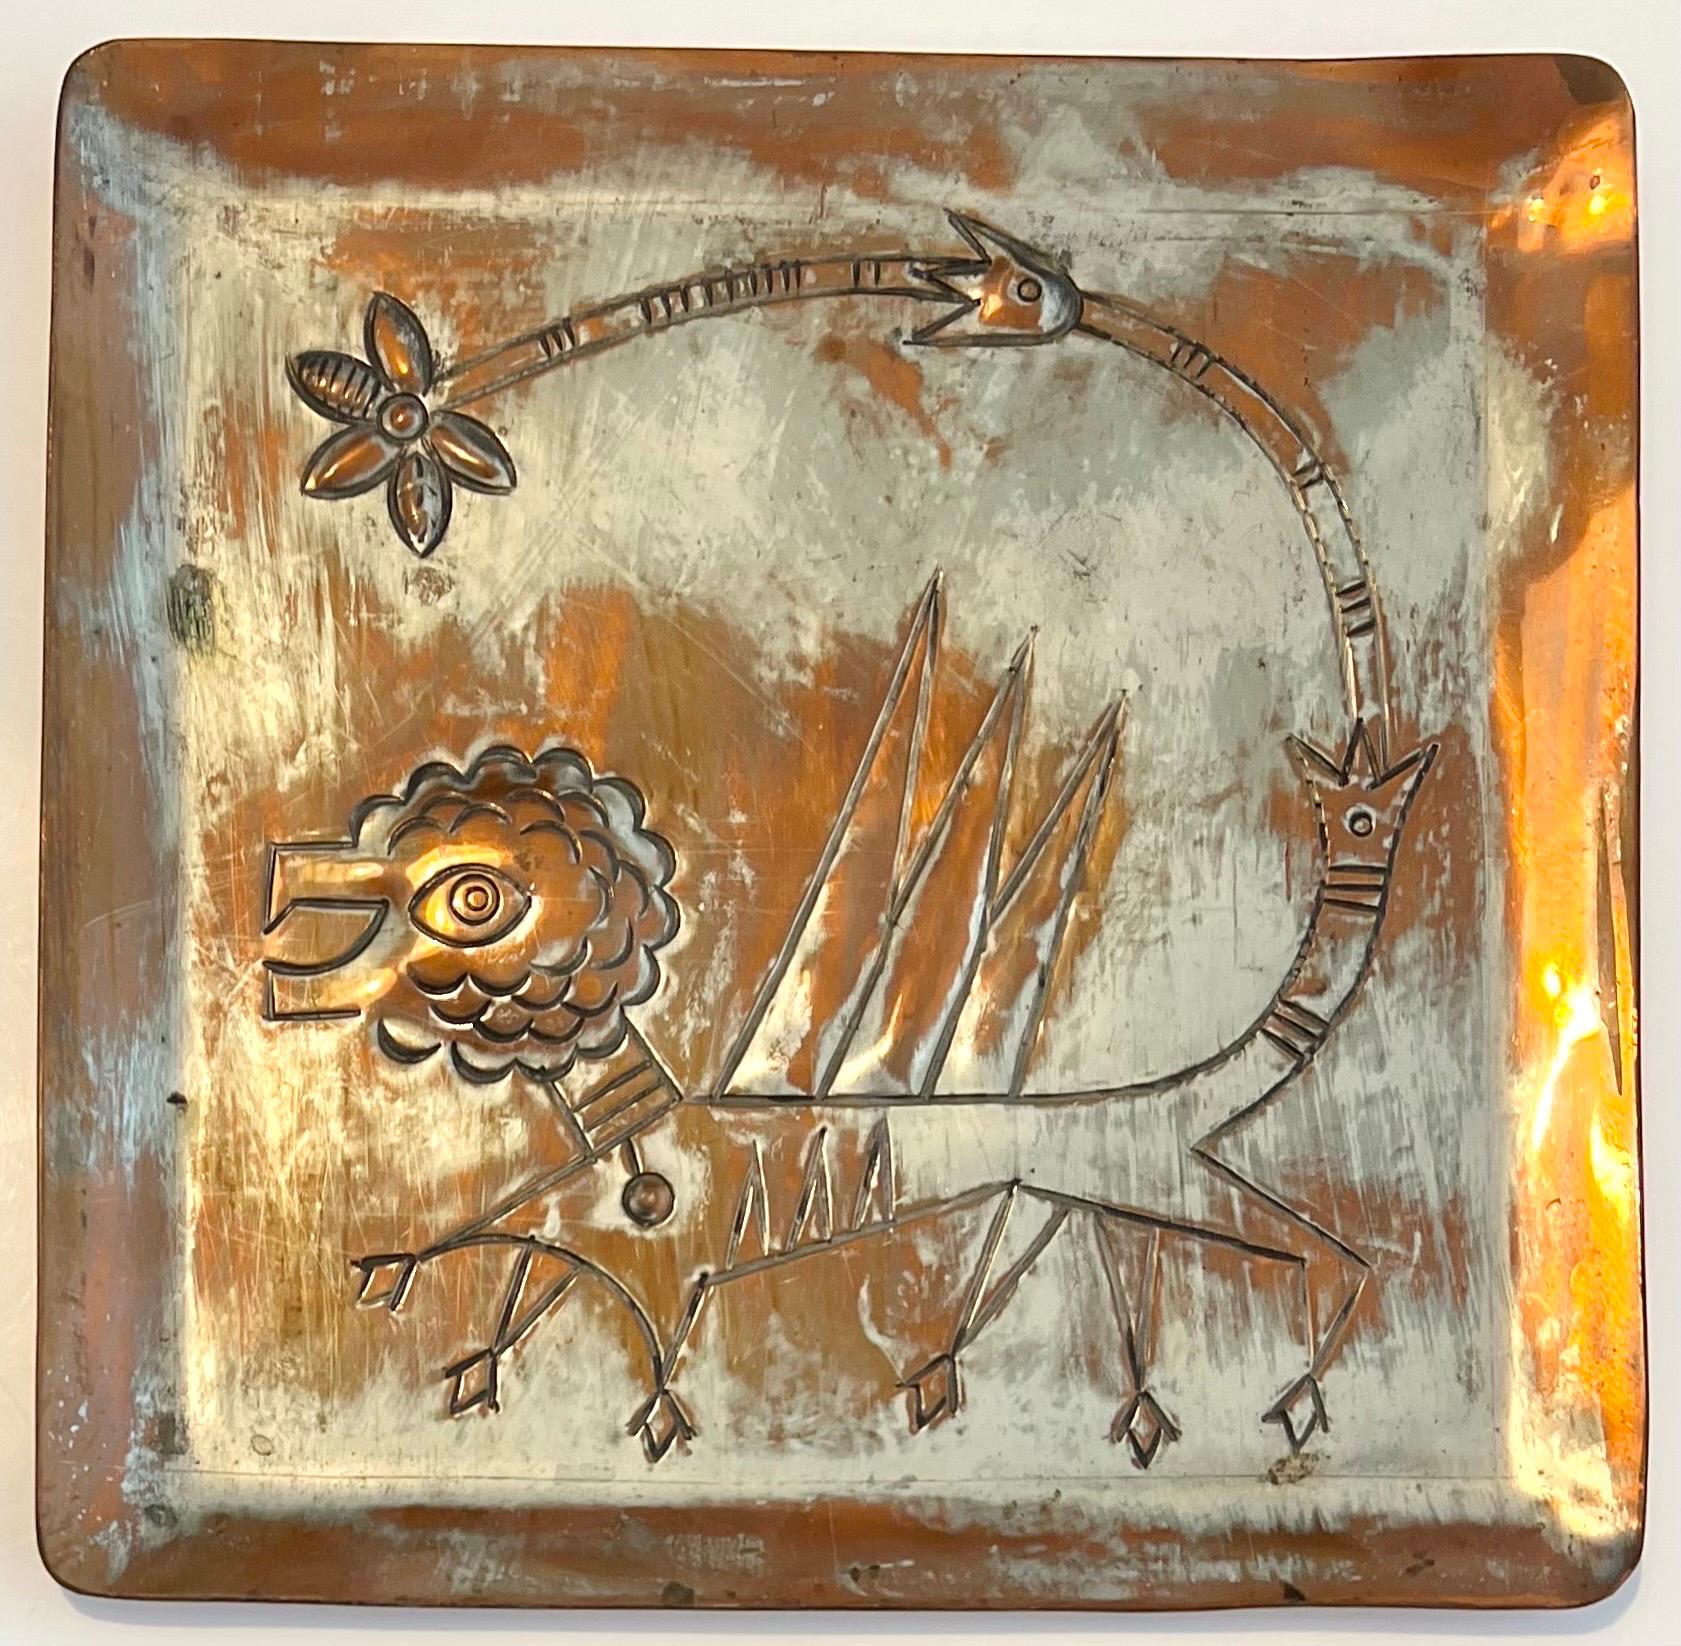 Hand made in israel handwrought tray, platter in Silver plated copper modernist tray, engraving and hammer work, with a whimsical mod lion and design decorations. From the YAAD workshop of Bezalel Schatz, son of Boris Schatz. silver plating has been